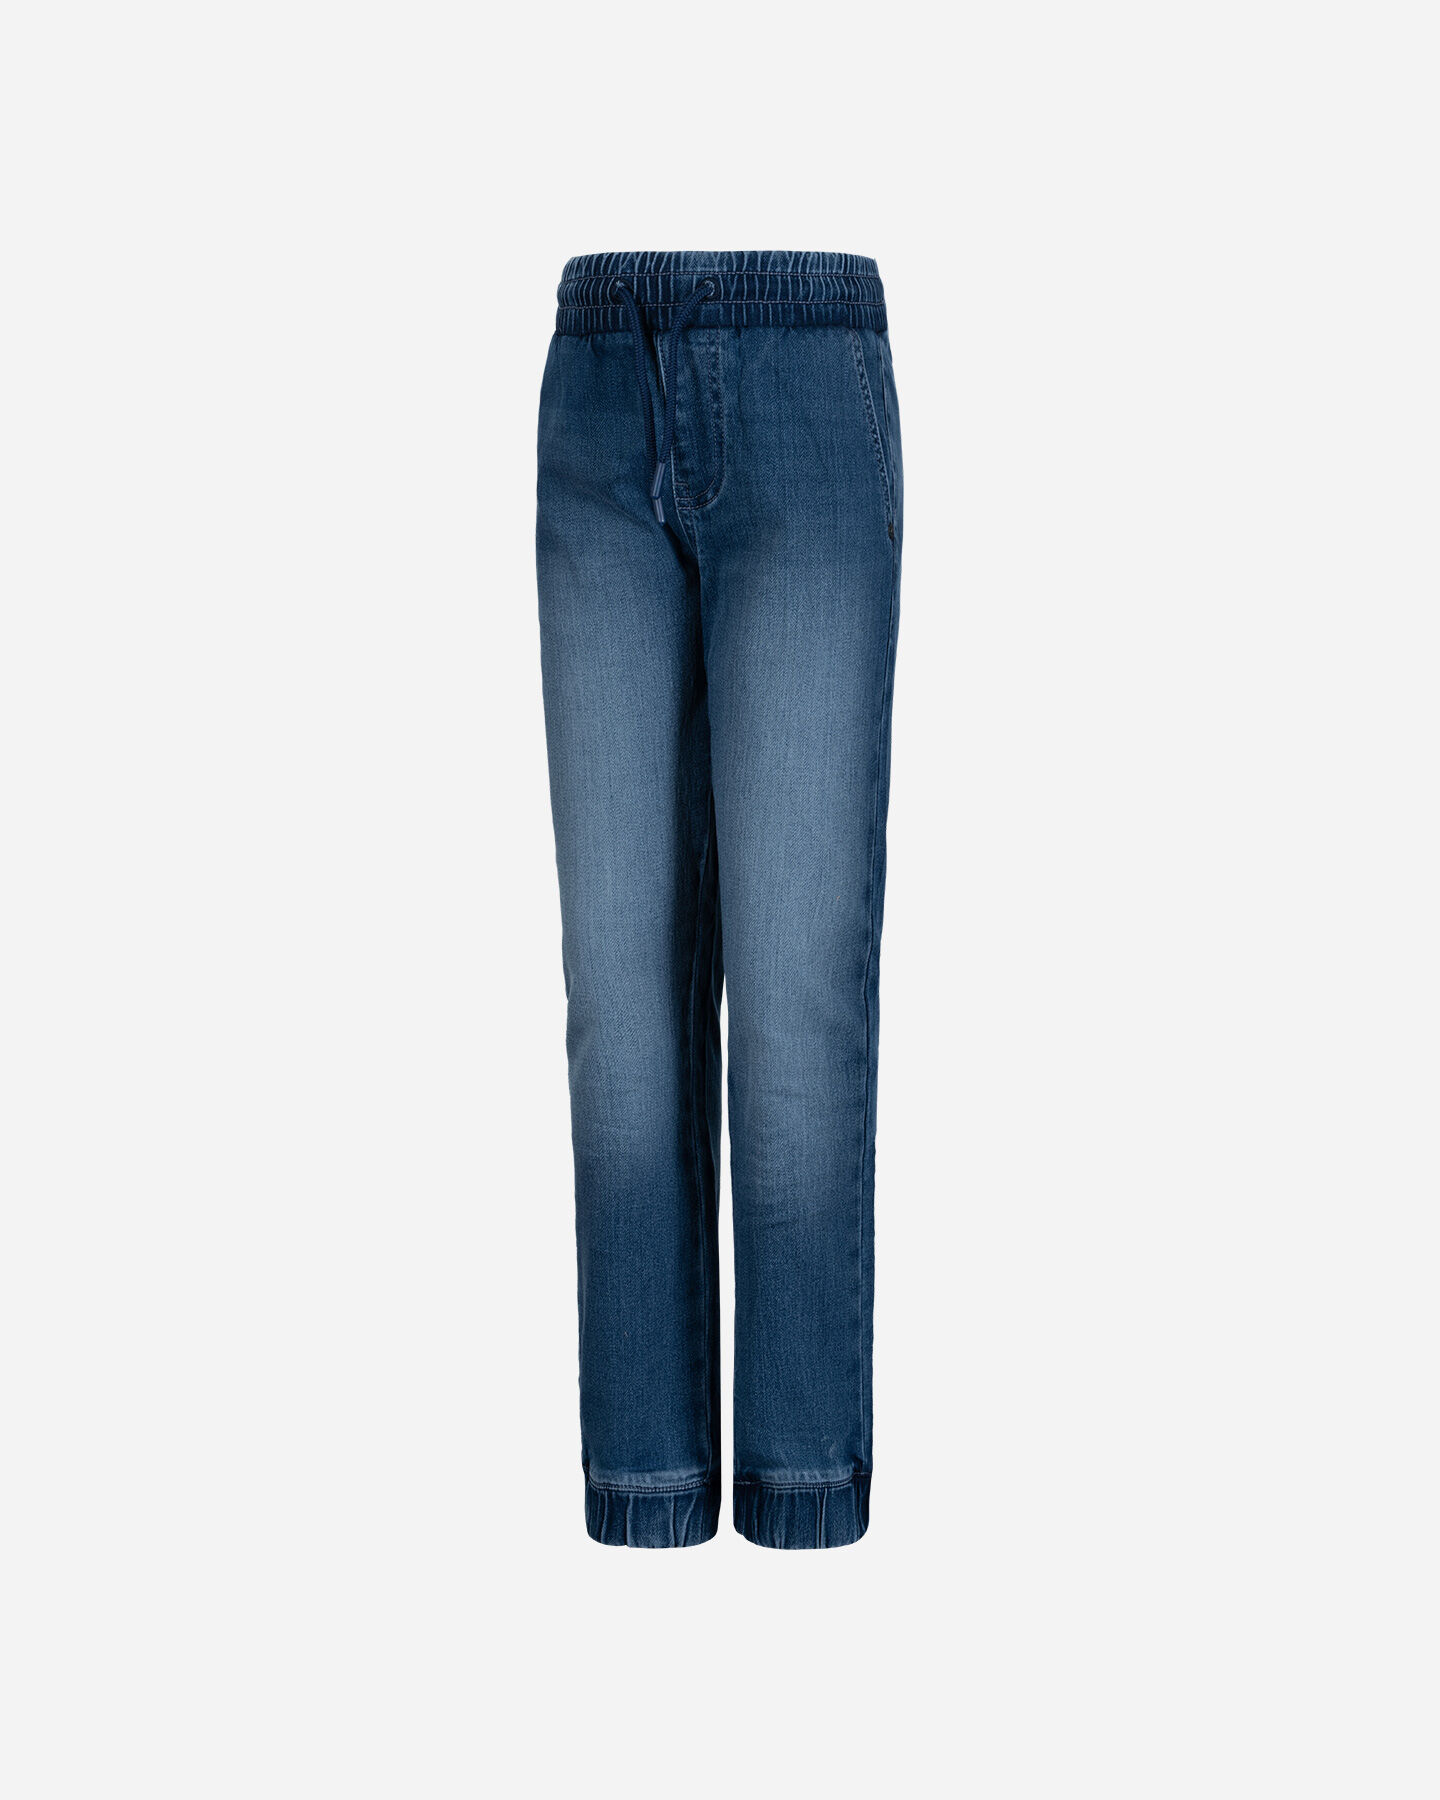  Jeans ADMIRAL COLLEGE BTS JR S4125682|MD|4A scatto 0